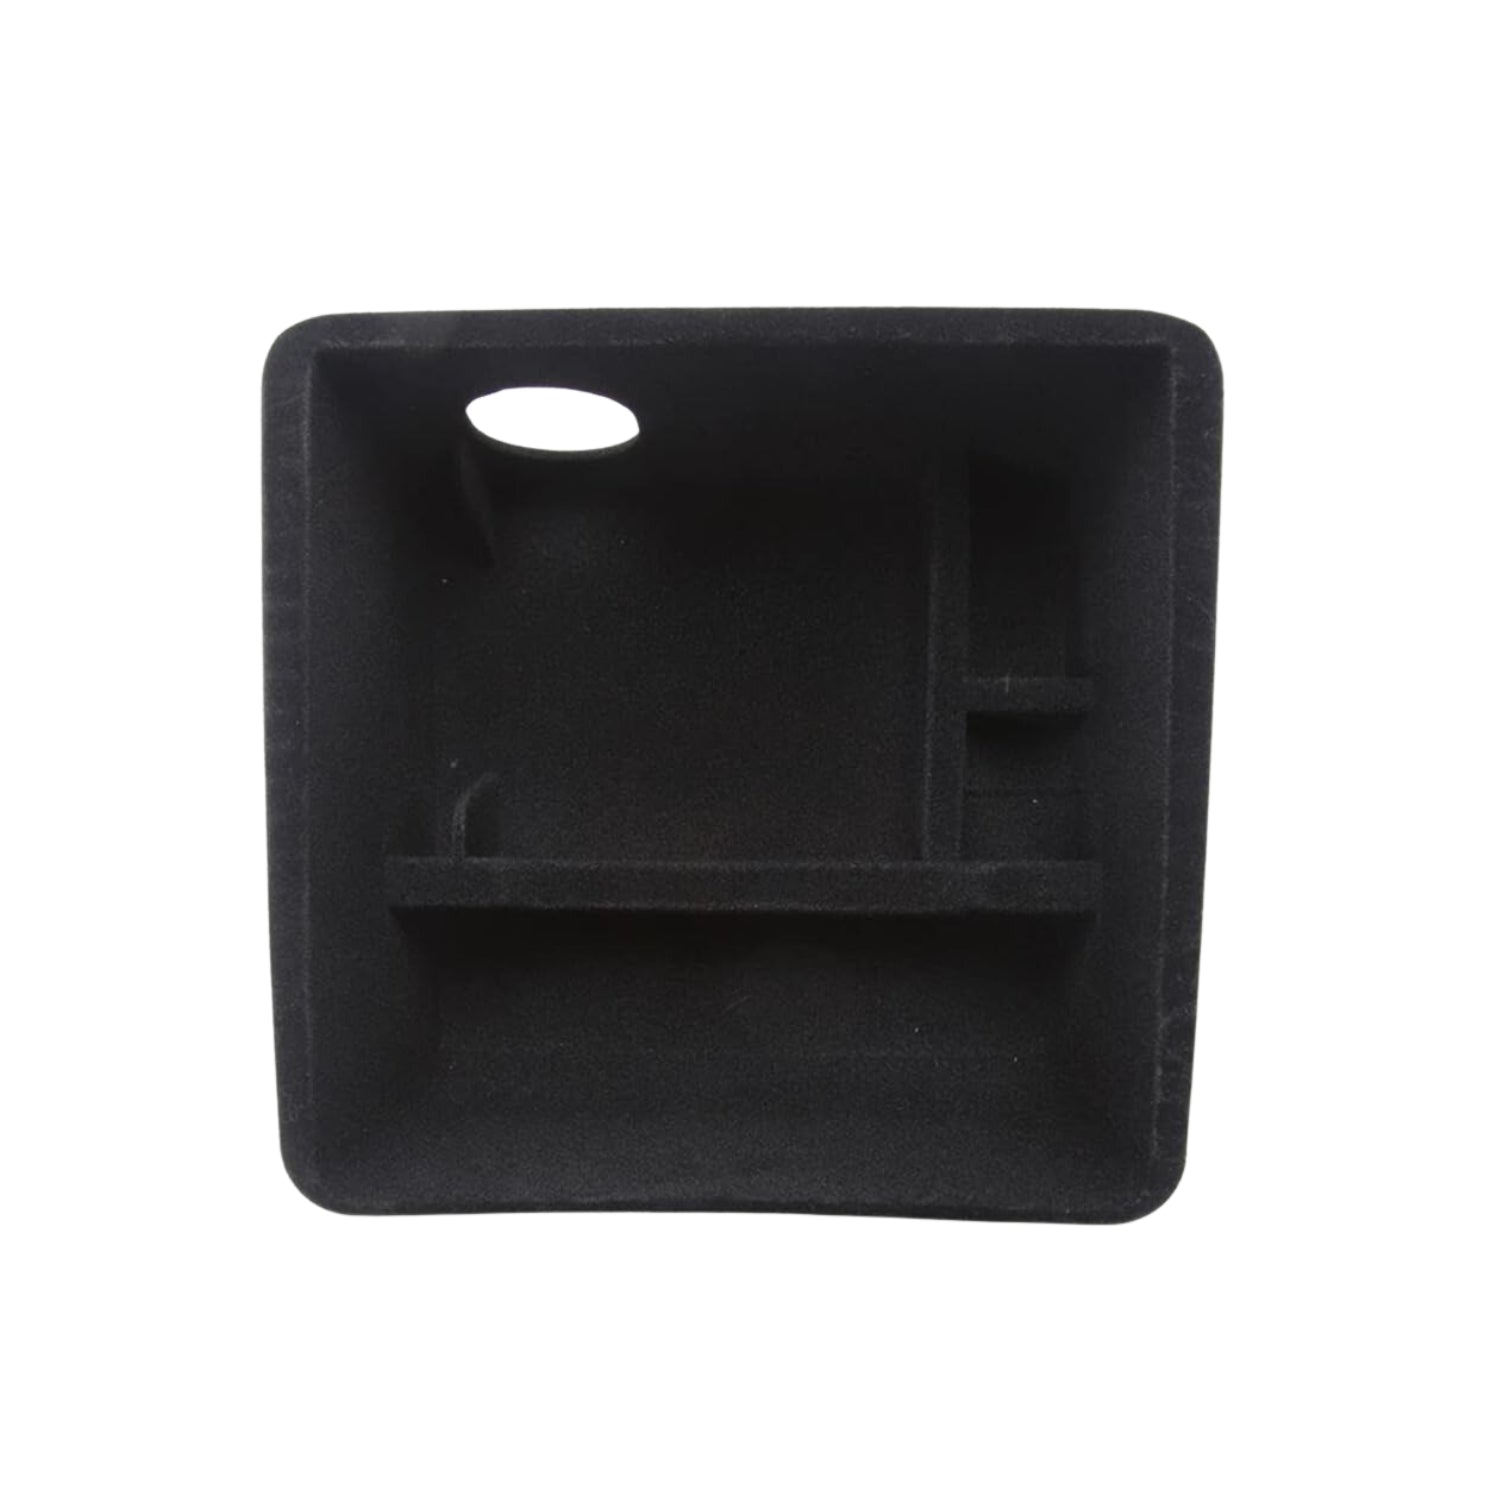 A Tesla Model 3 & Y compatible Black Armrest Center Console Organizer Storage Container Tray made with a black soft outer material for softer touch 